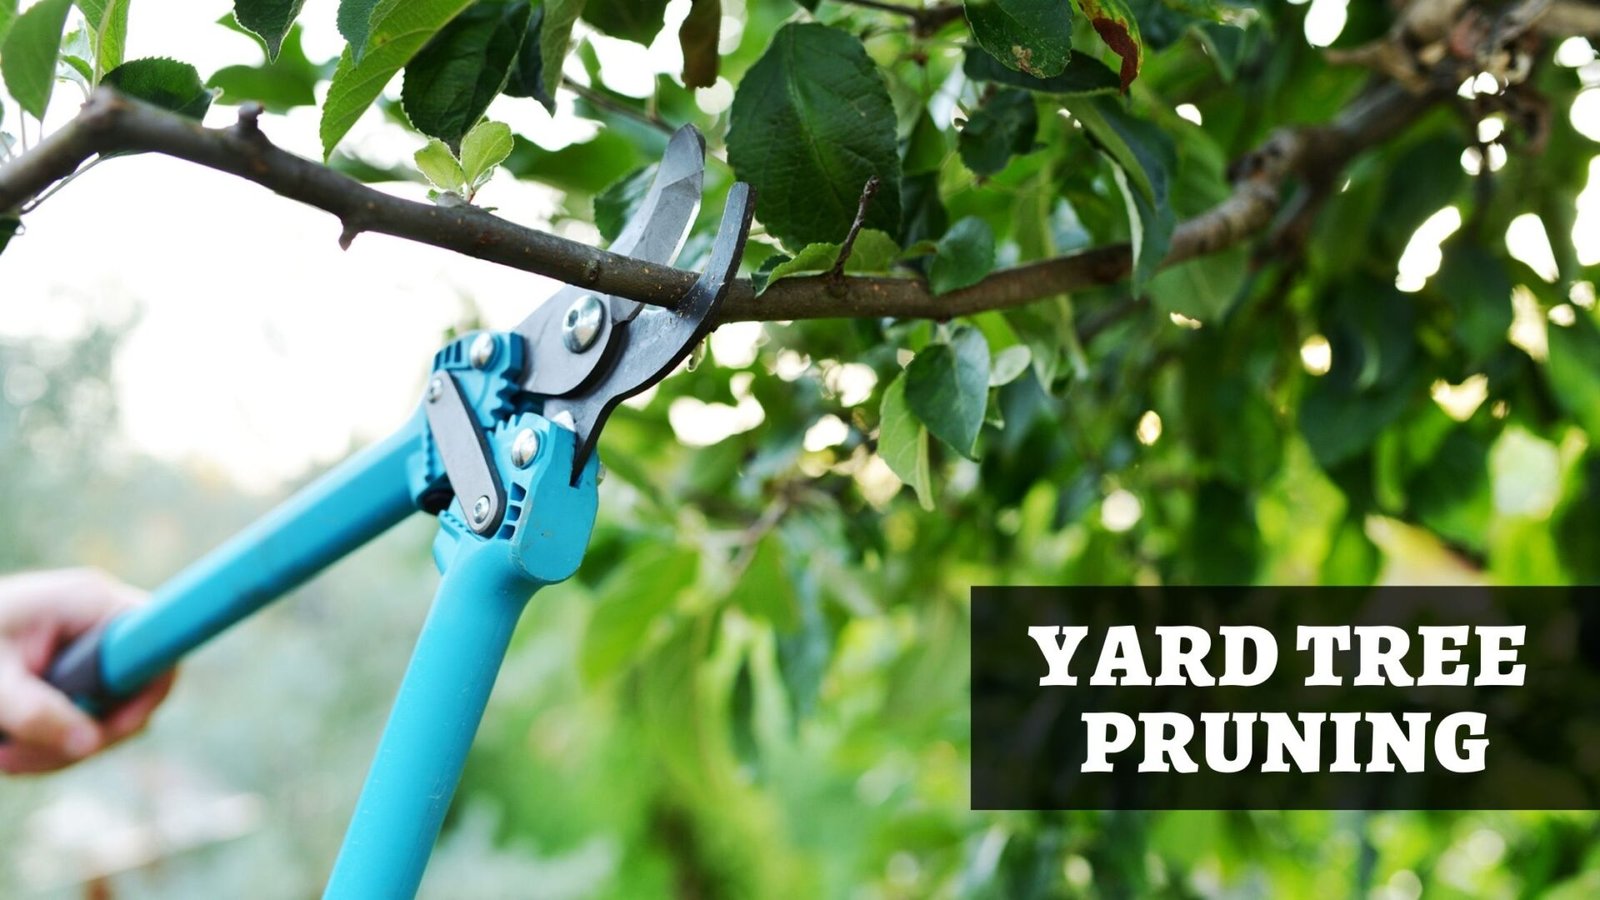 Tree Pruning: How and When to Prune Your Yard Trees? 2021